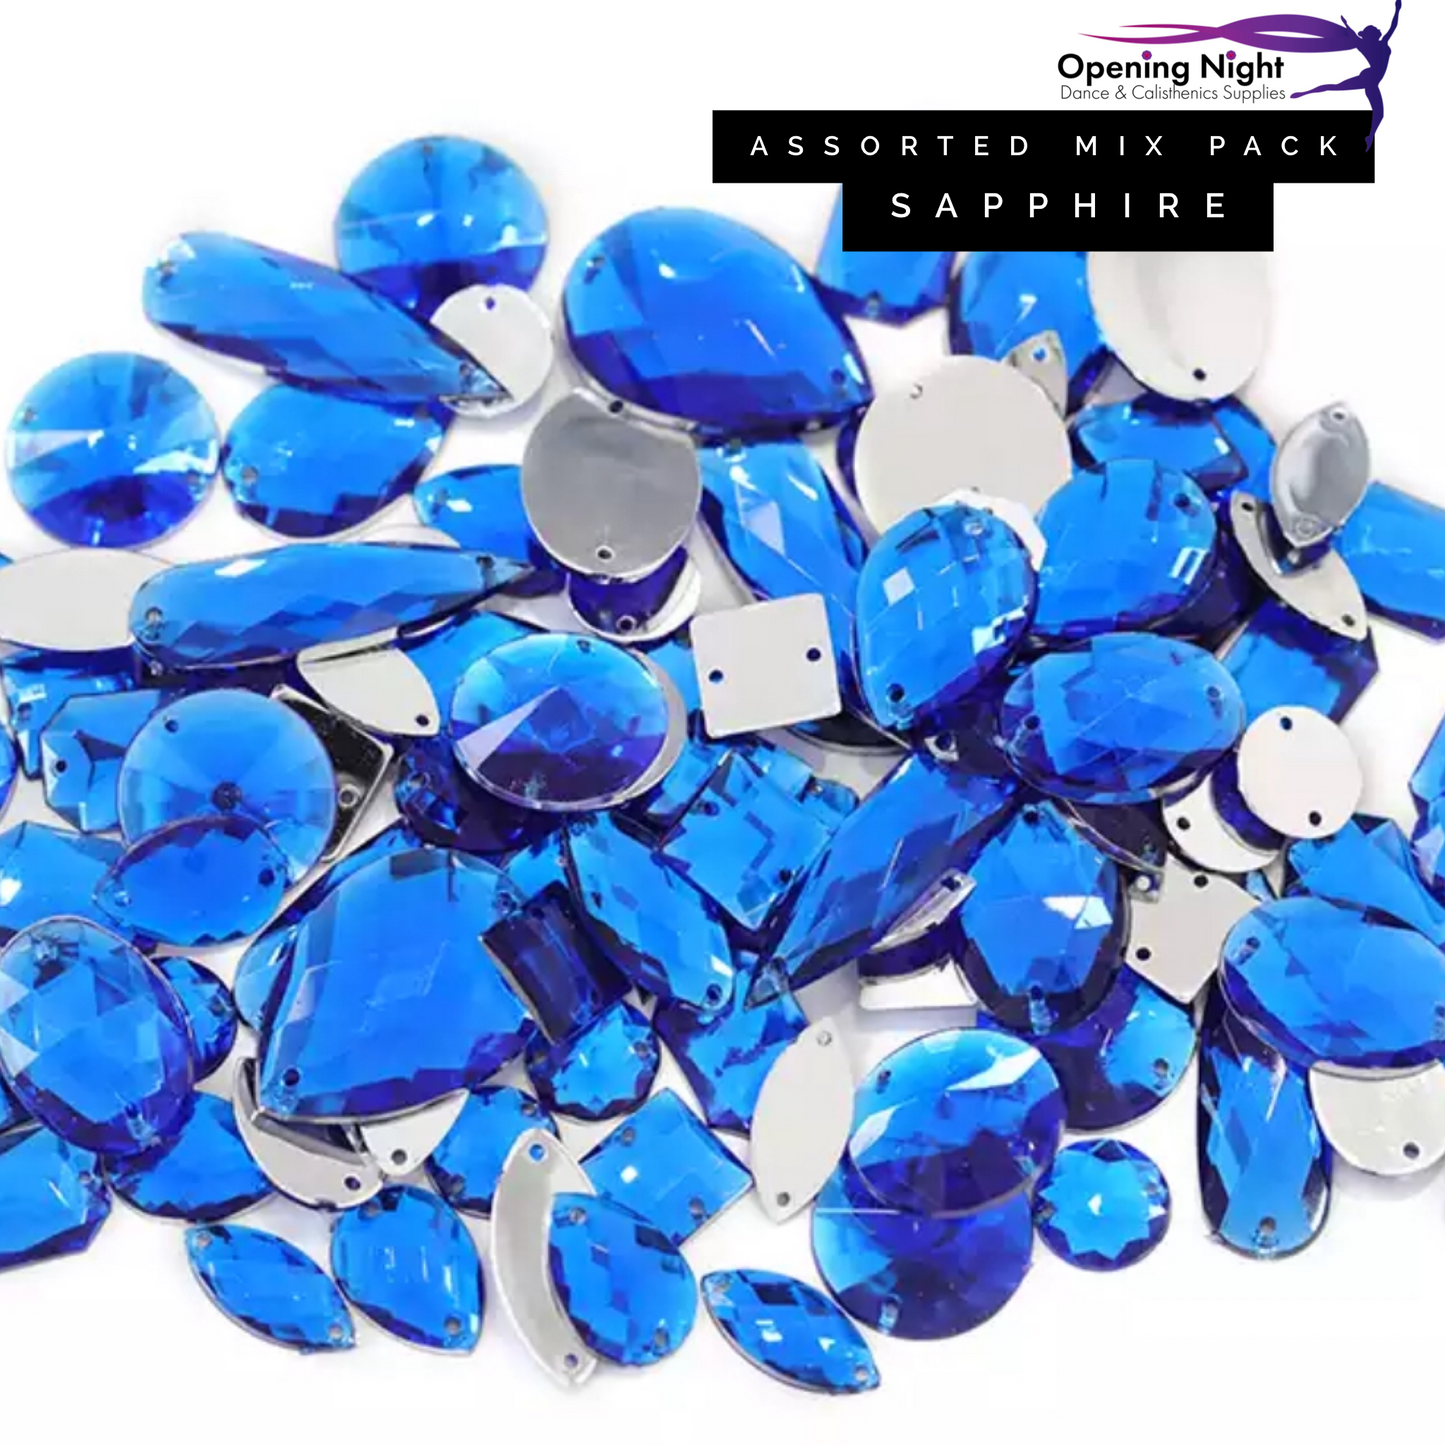 Assorted Mix Pack - Sapphire